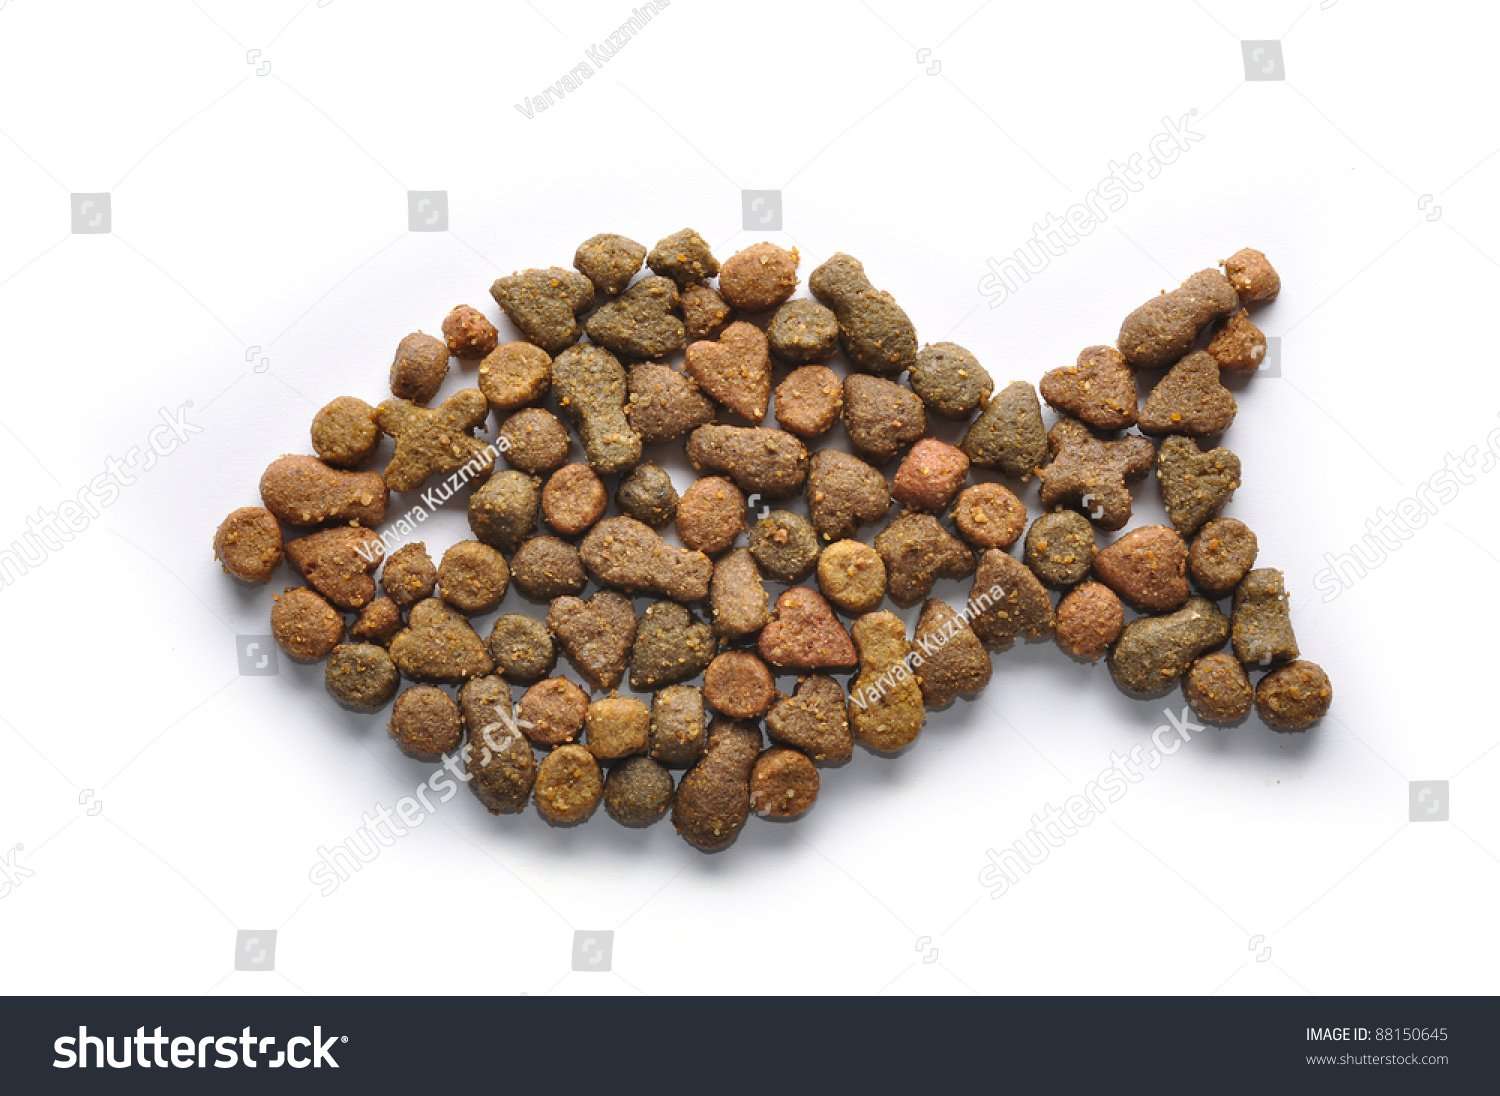 Fish Shaped Cat Food Isolated On Stock Photo 88150645 ...